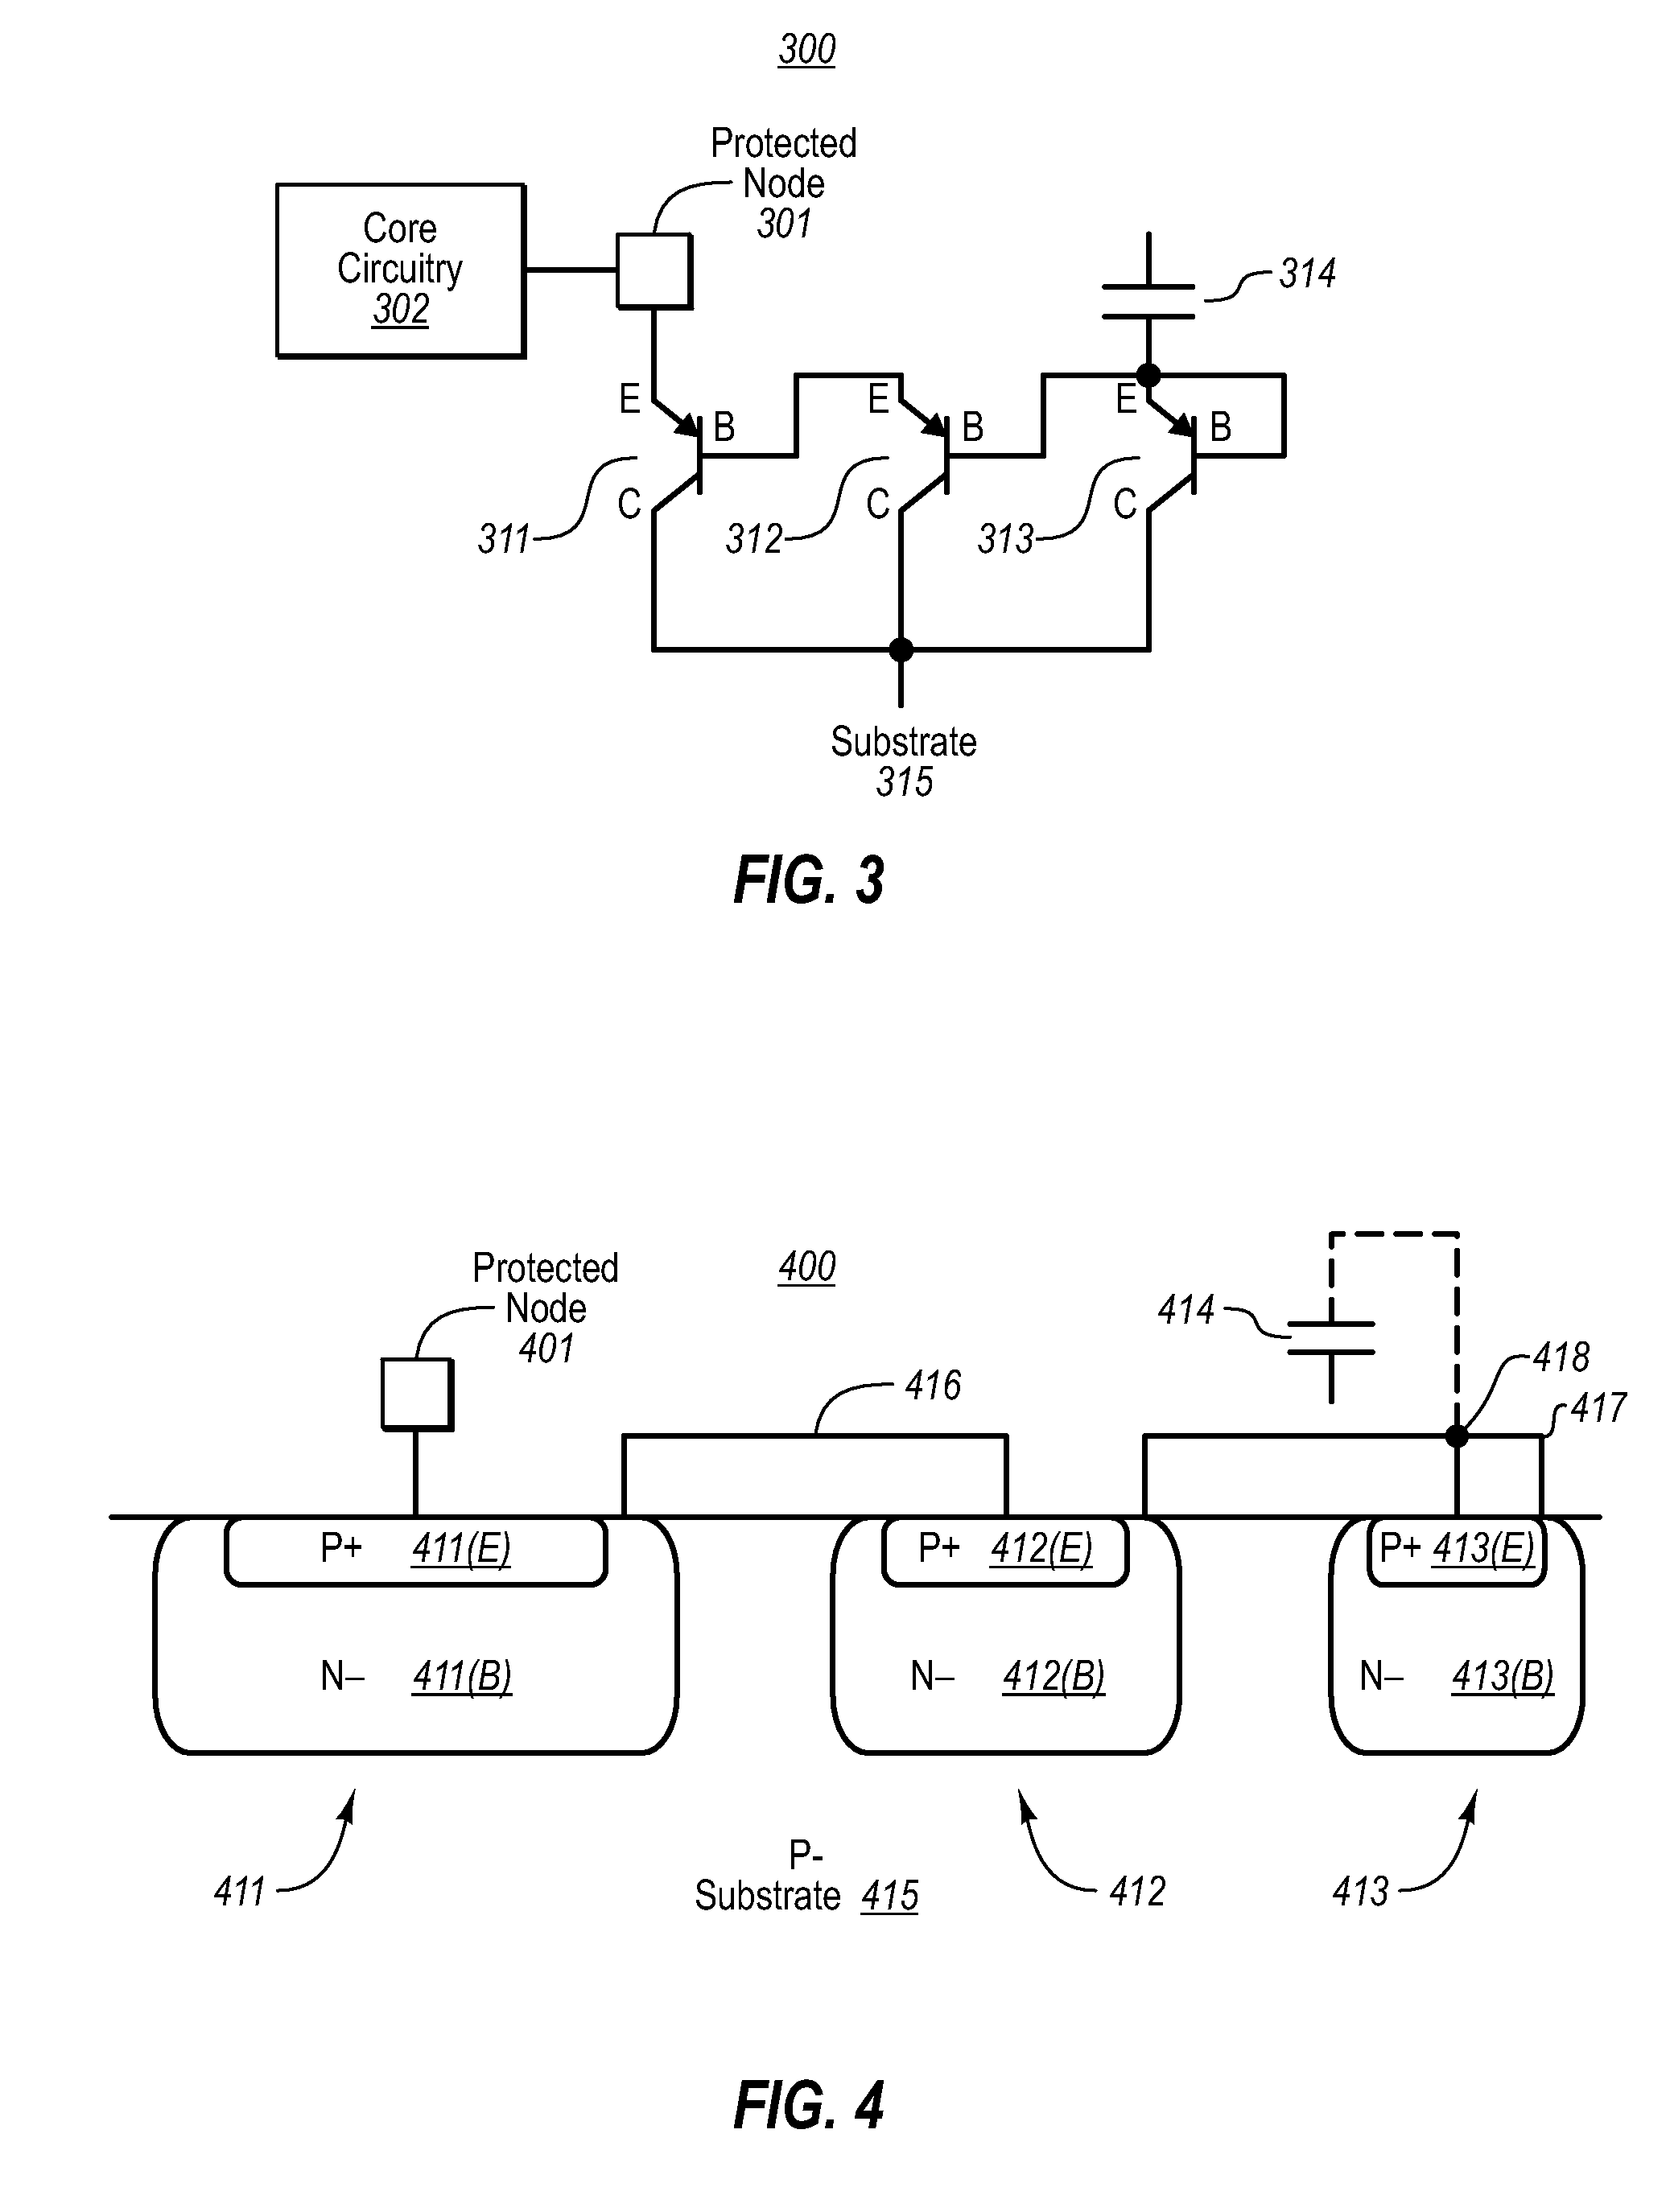 Current protection circuit using multiple sequenced bipolar transistors